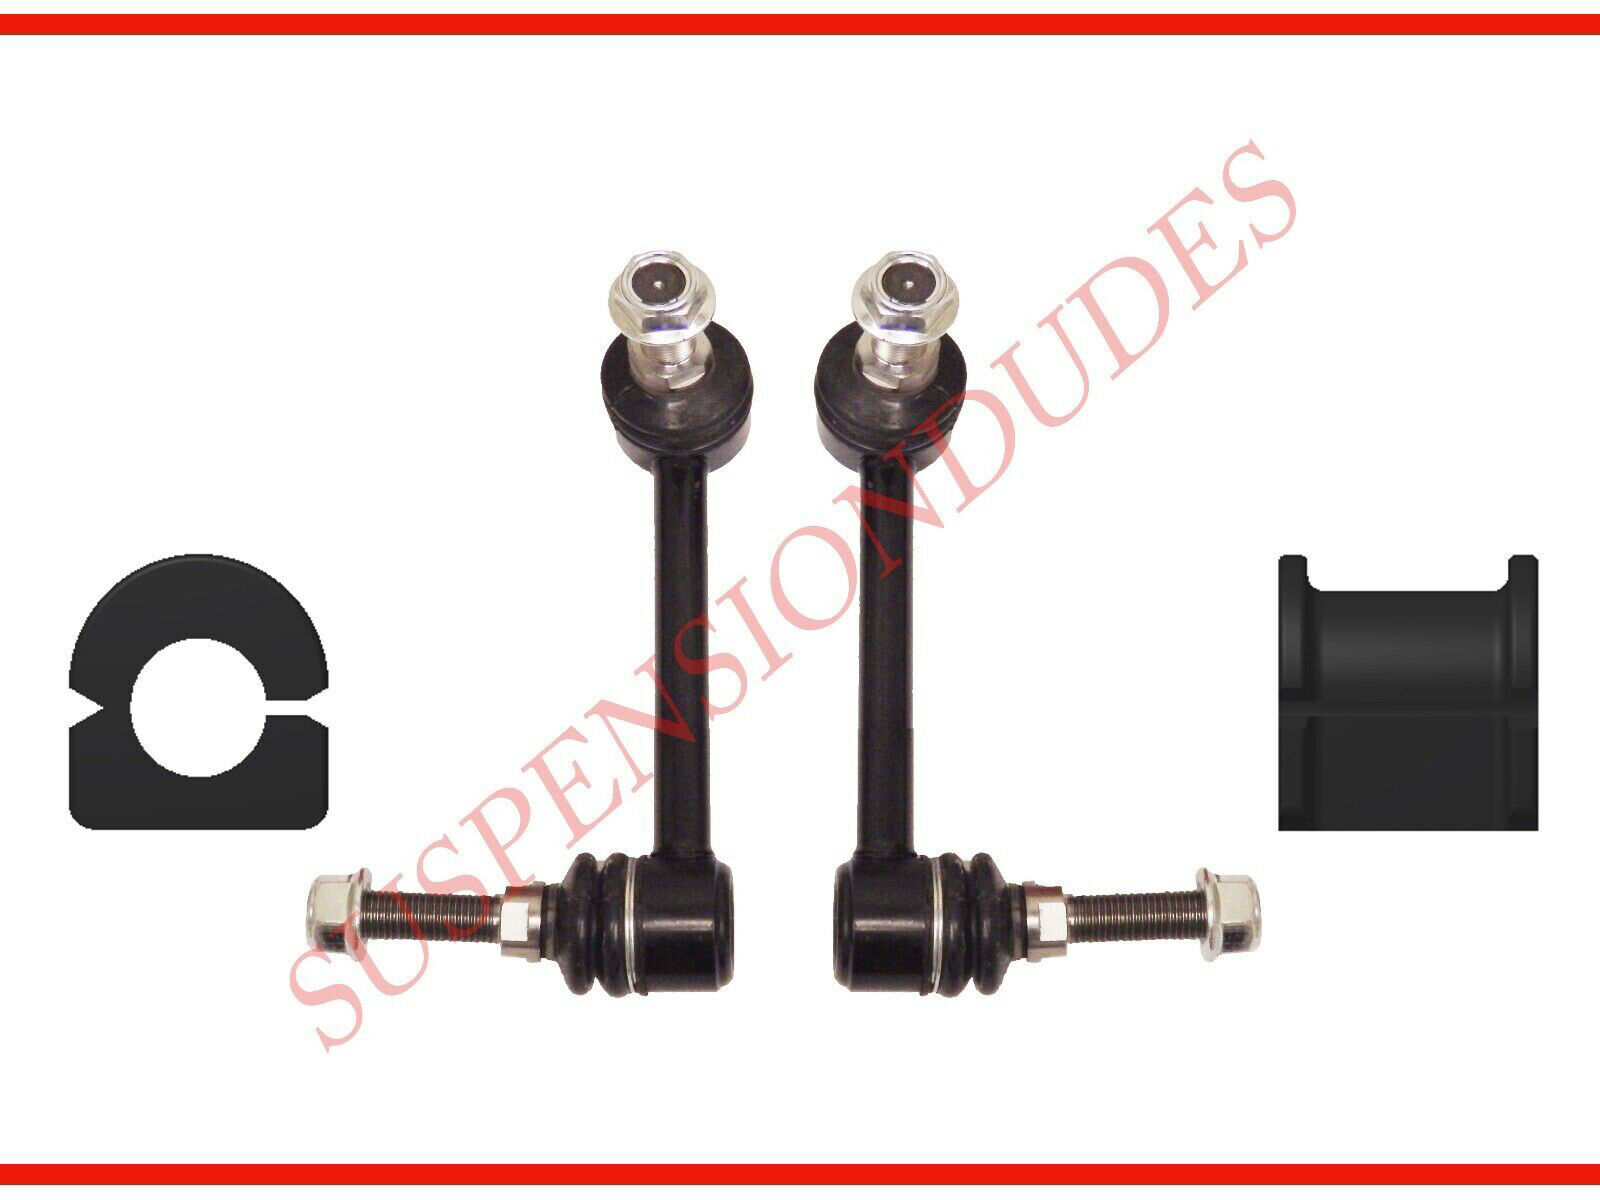 4pc Front Sway Bar Links + Front Bushings 4x4 Toyota Tacoma 2005-2015 29mm-30mm